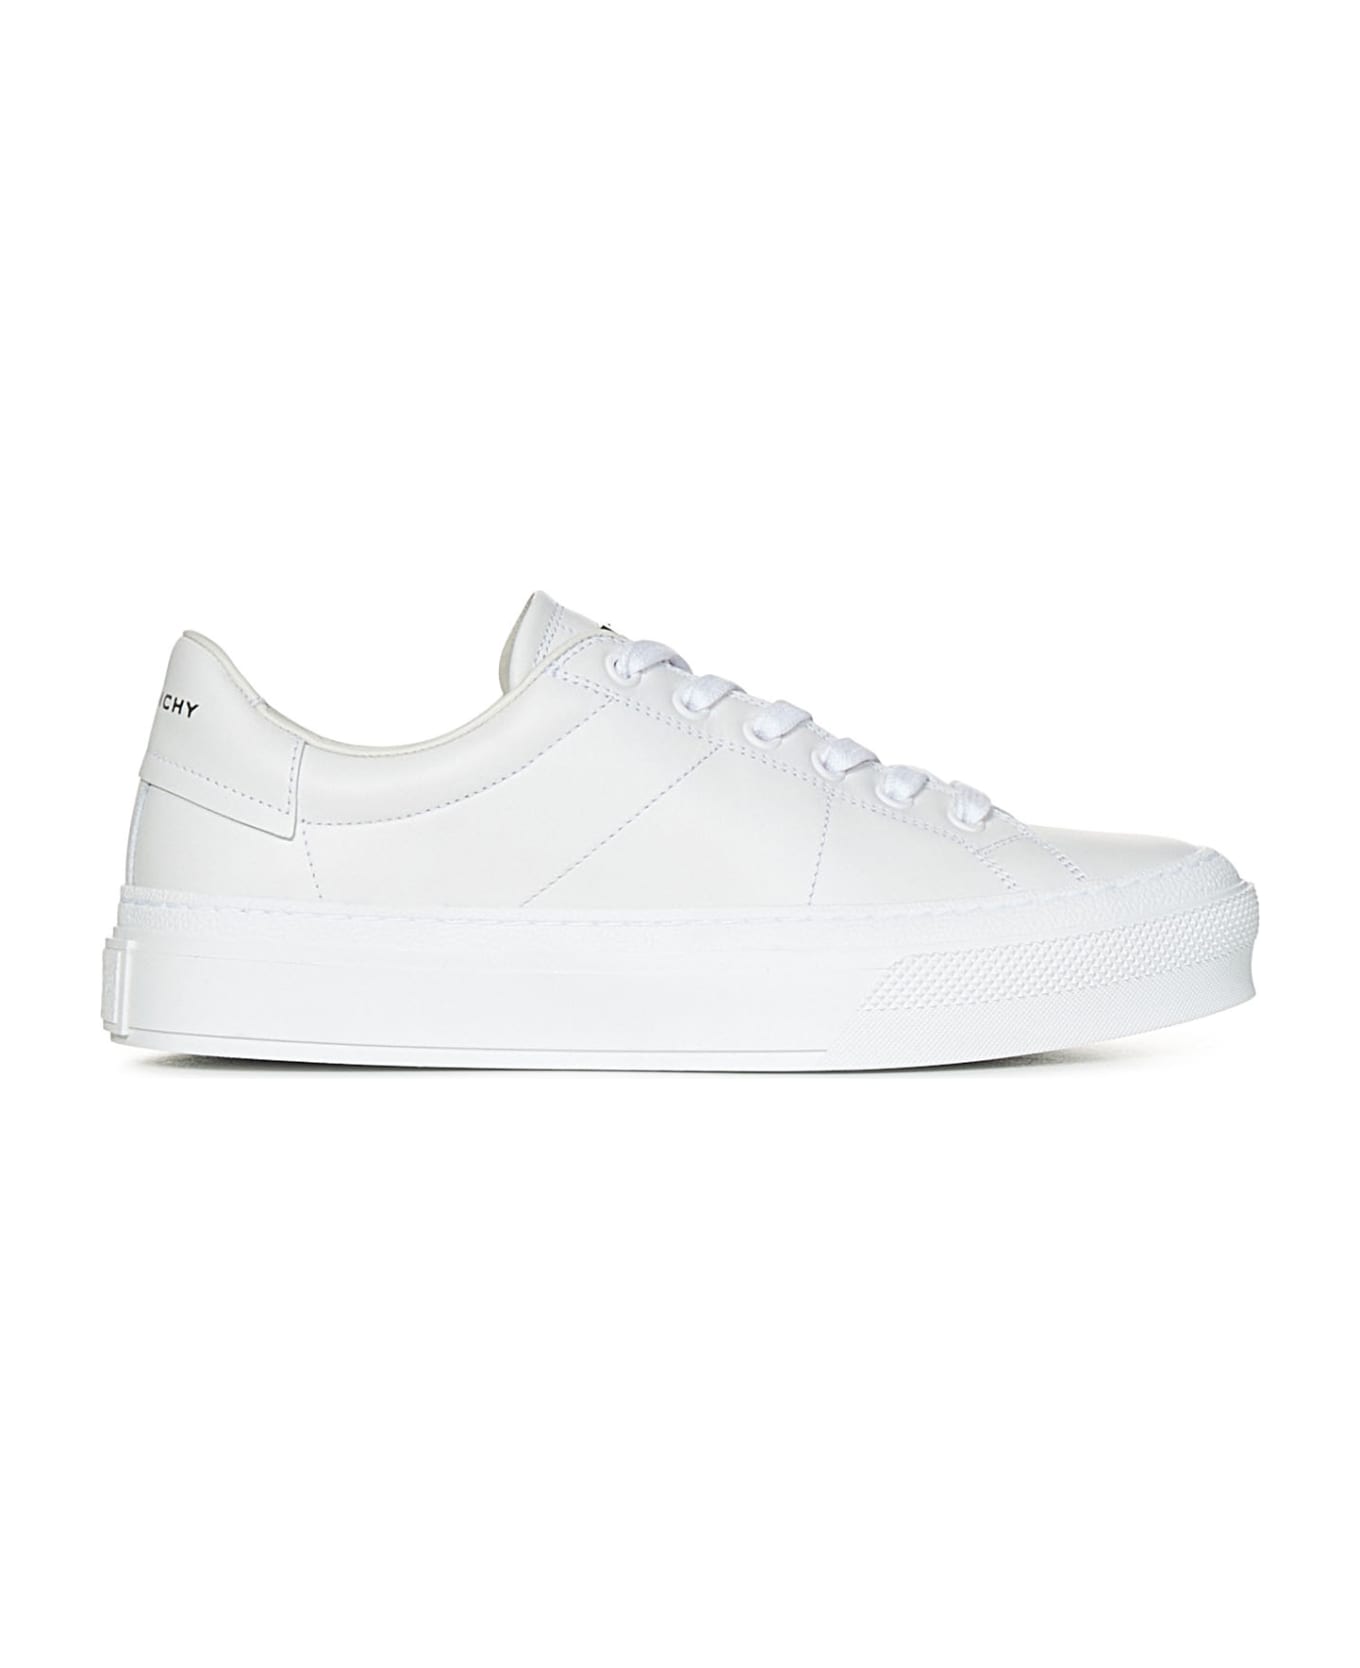 Givenchy City Sport Sneakers - white スニーカー